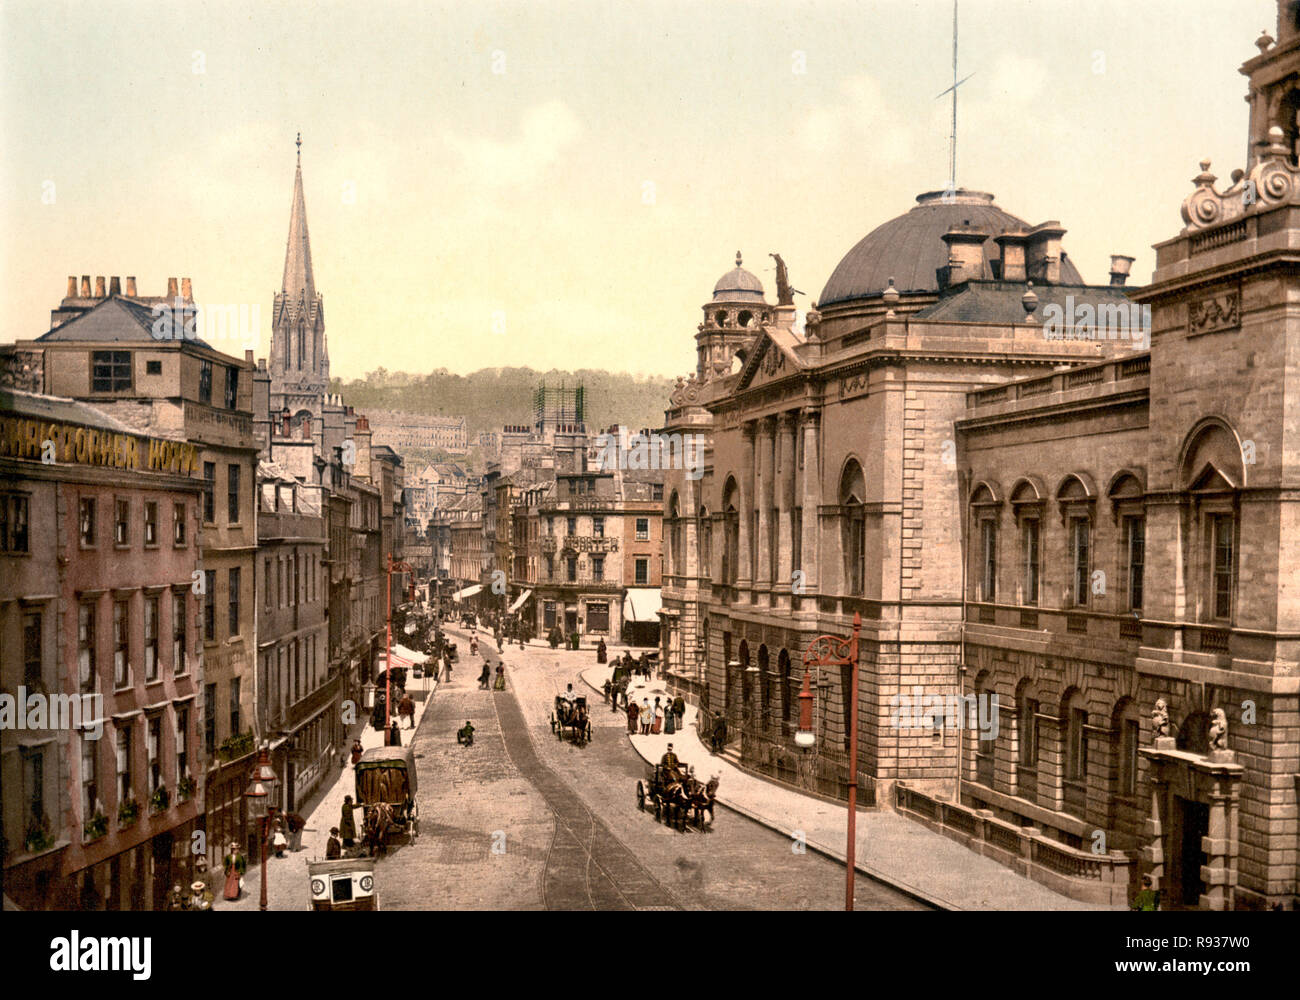 High Street, Bath, Angleterre, vers 1900 Banque D'Images